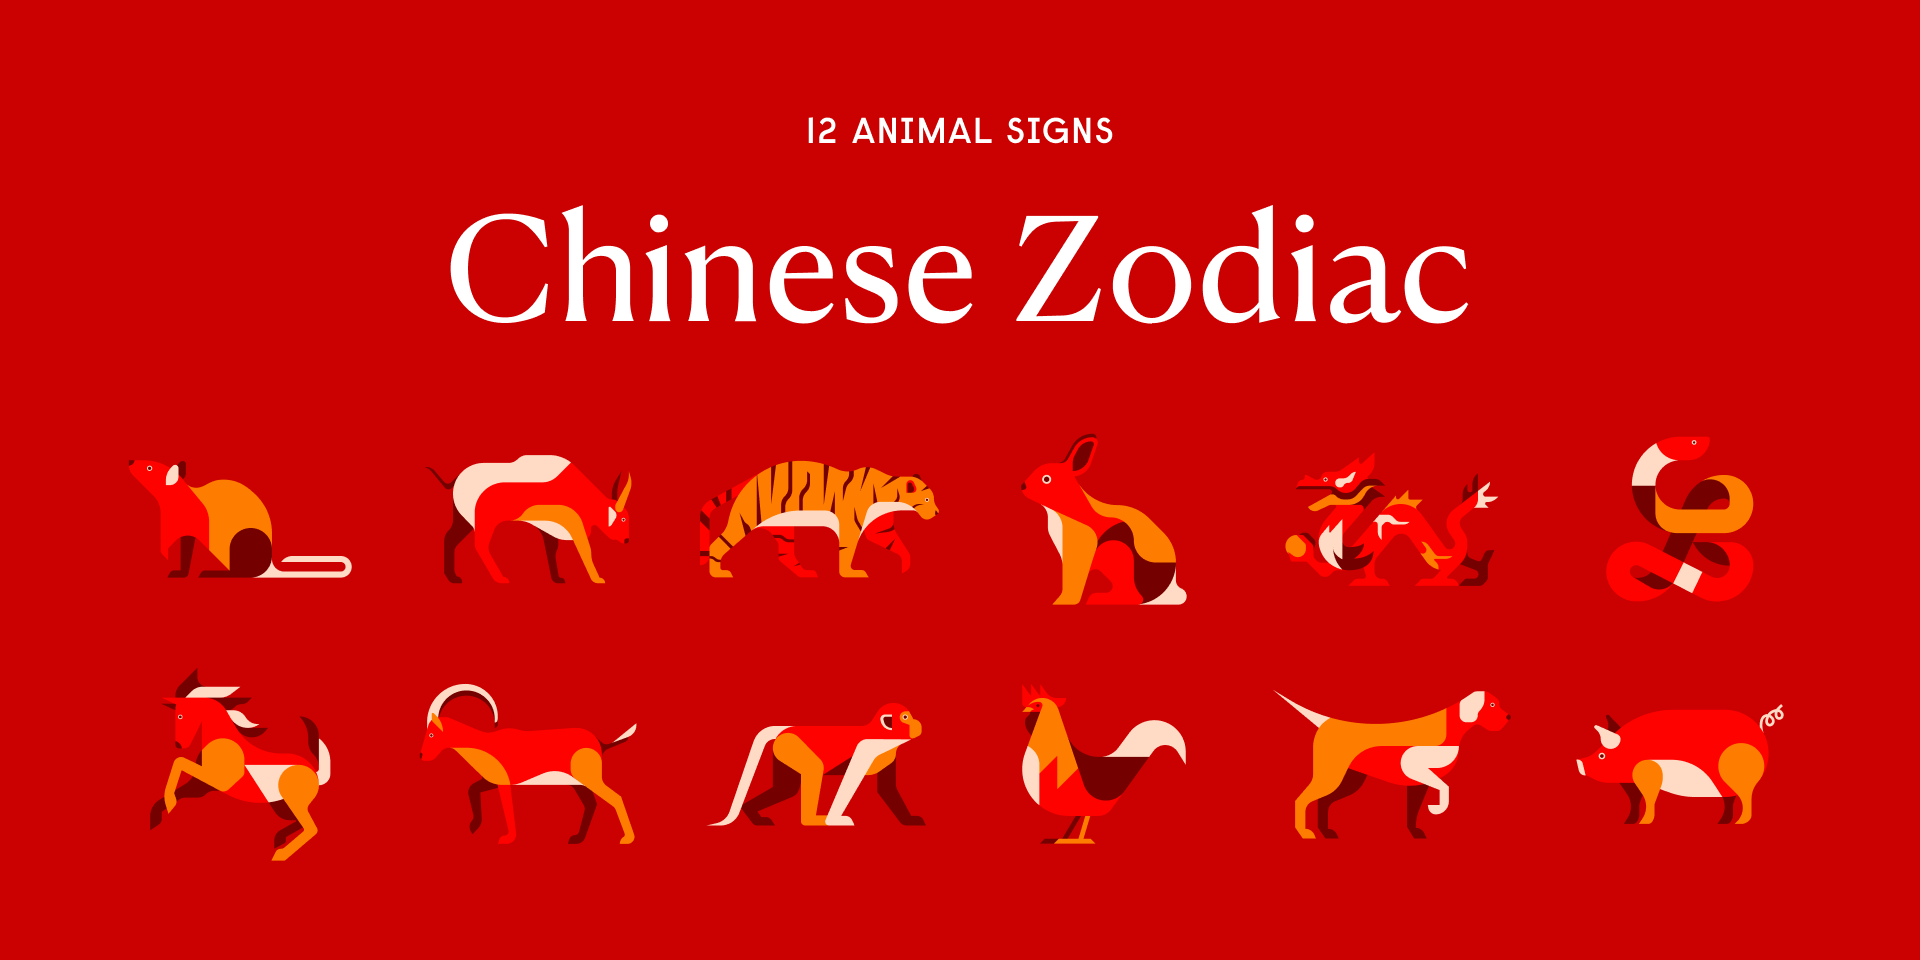 Chinese your zodiac sign what is Chinese Zodiac: